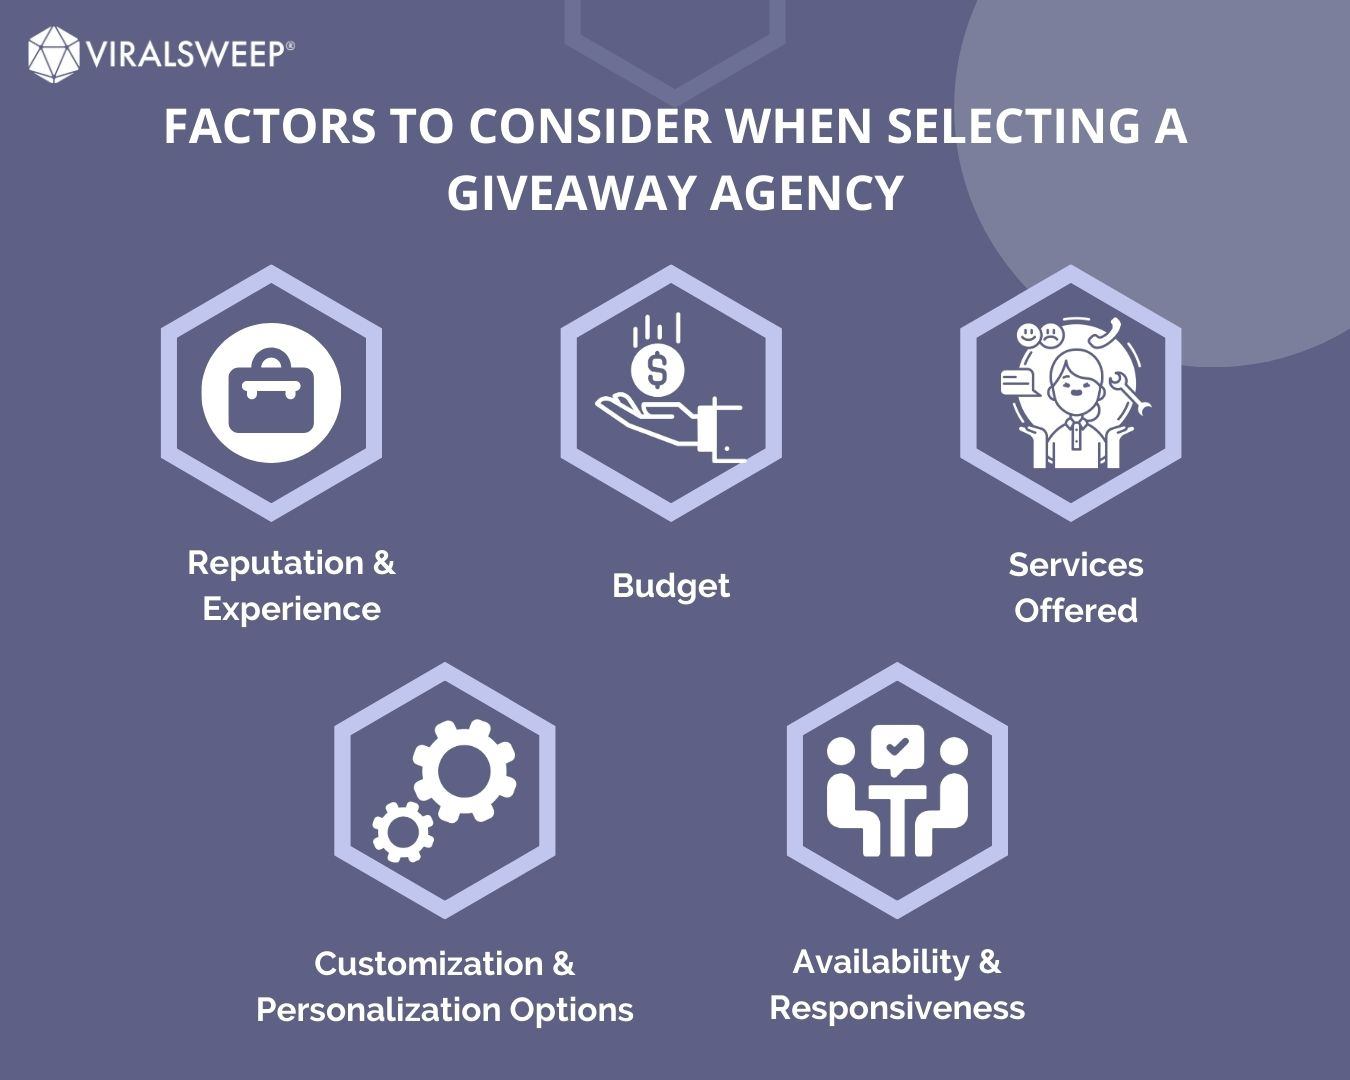 Factors to consider when selecting a giveaway agency